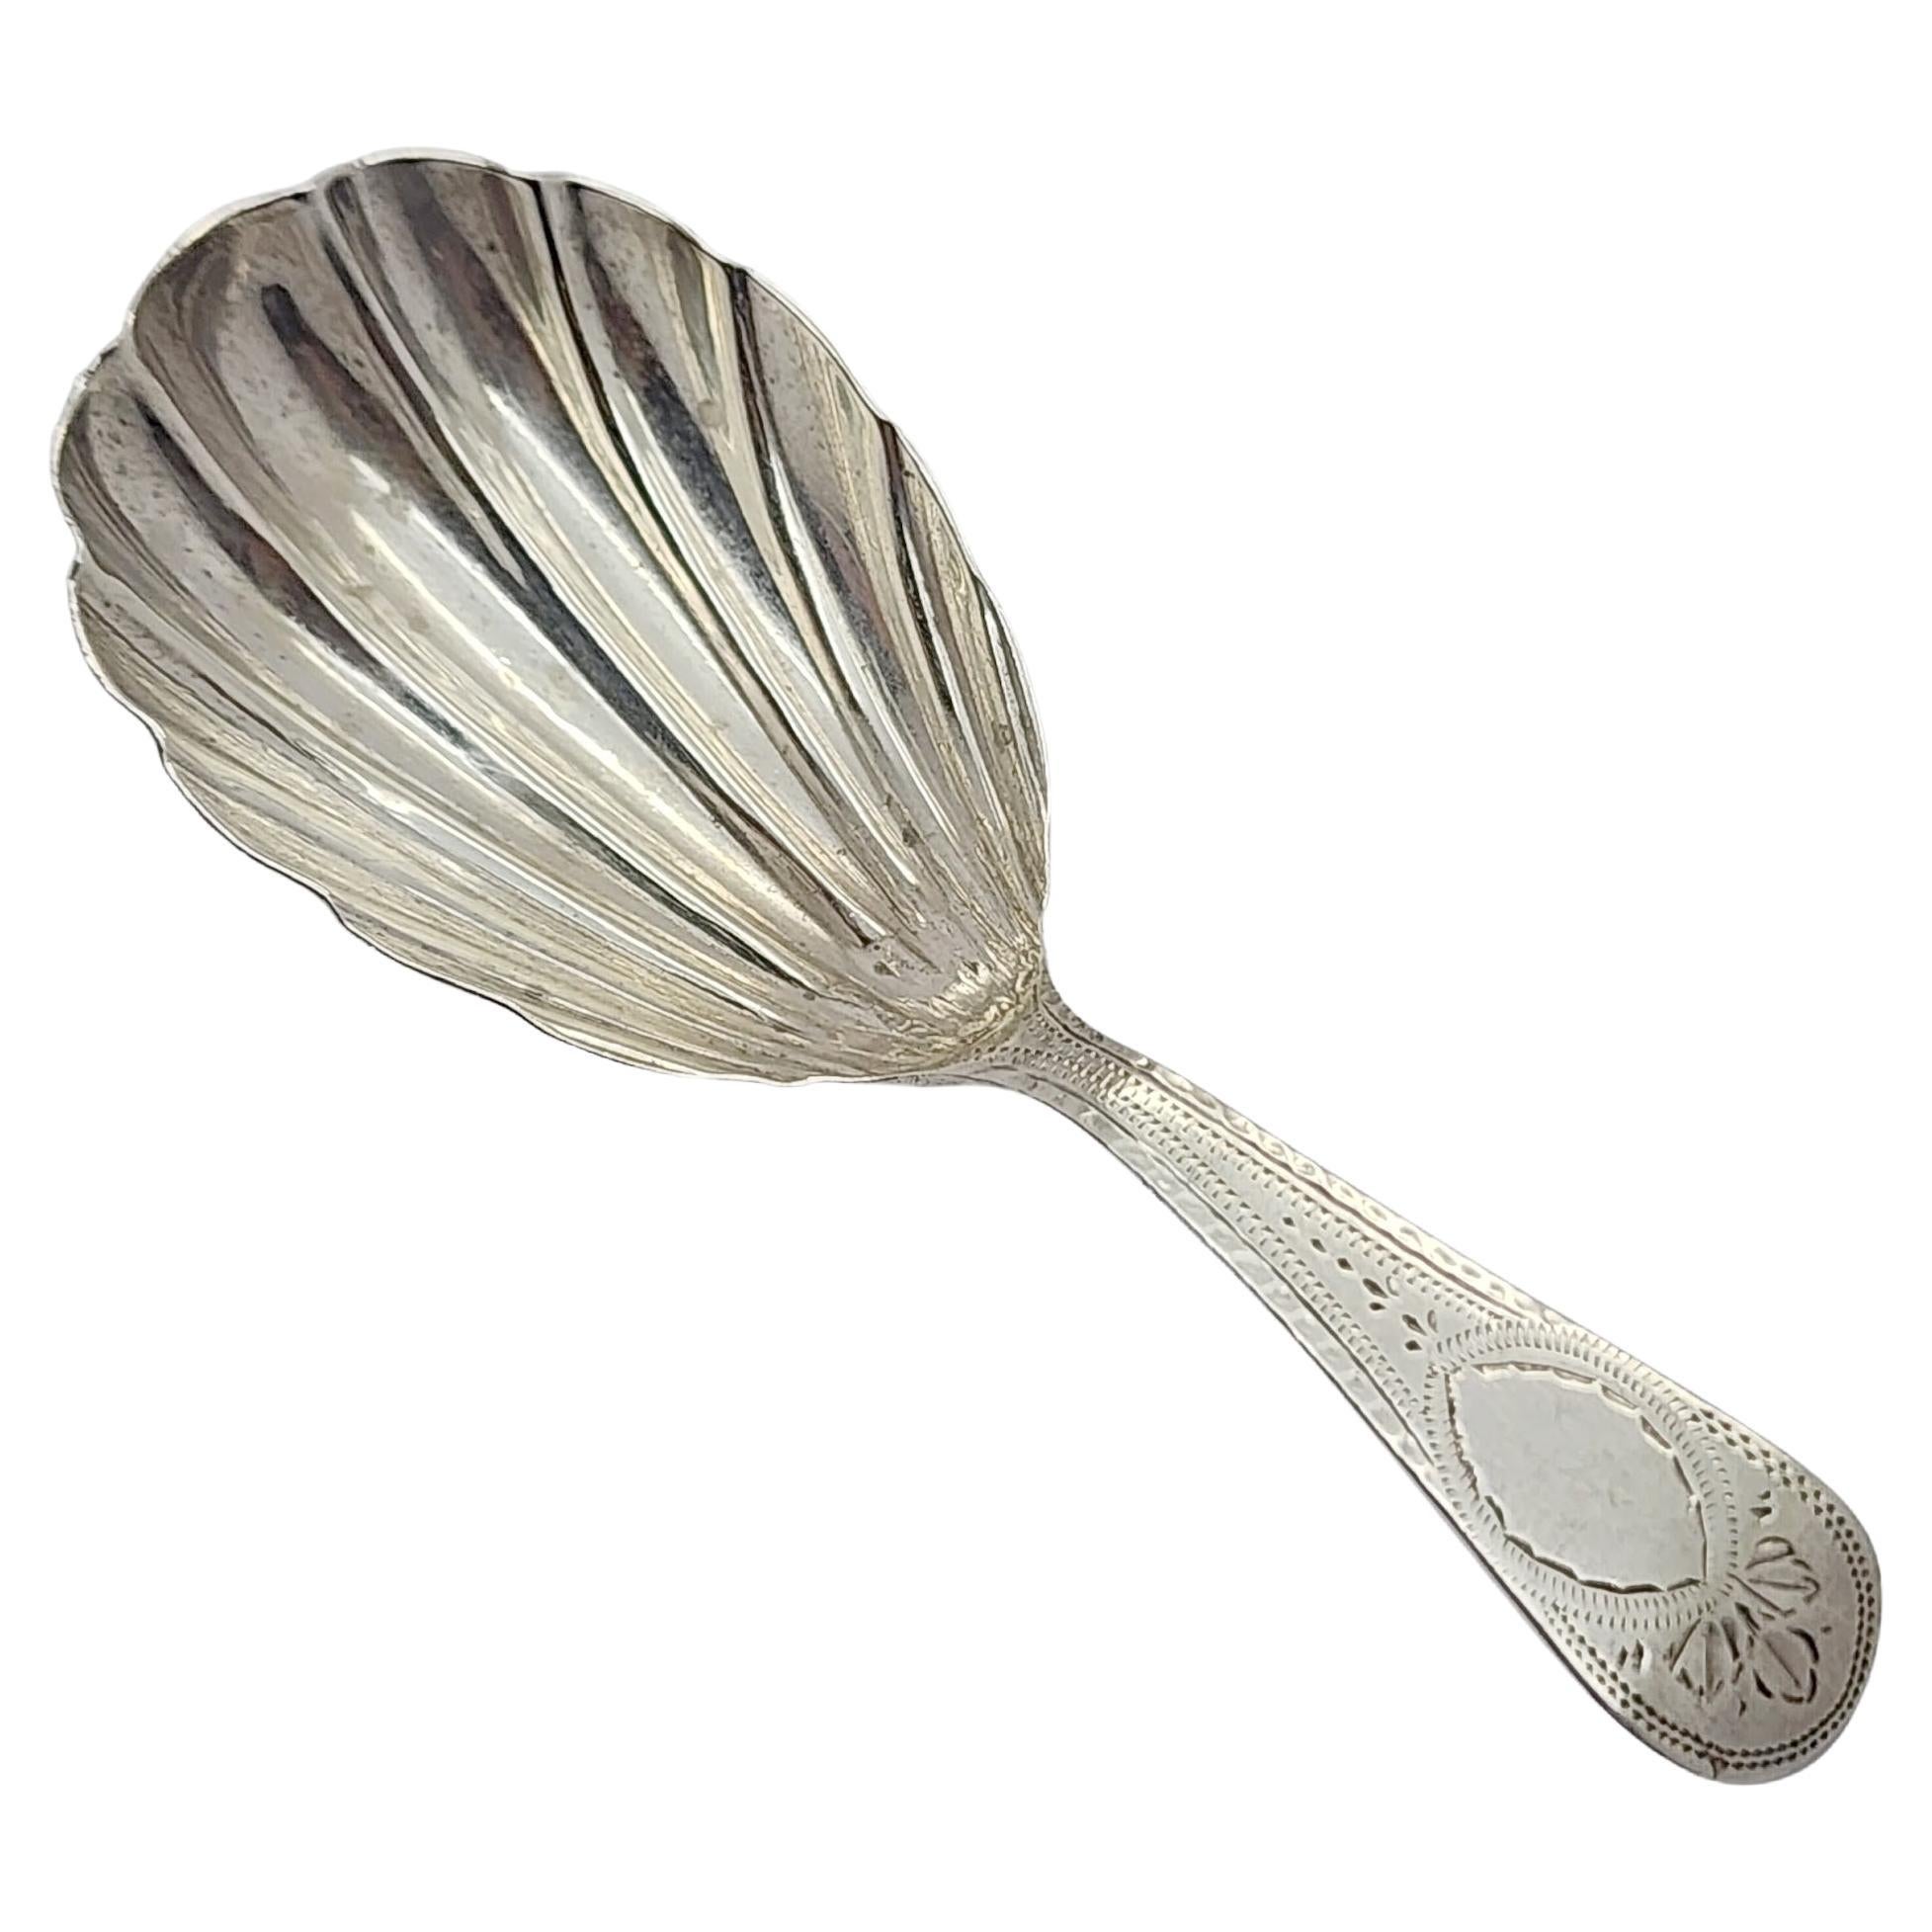 Antique Richard Crossley London English Sterling Tea Caddy Shell Bowl Spoon For Sale